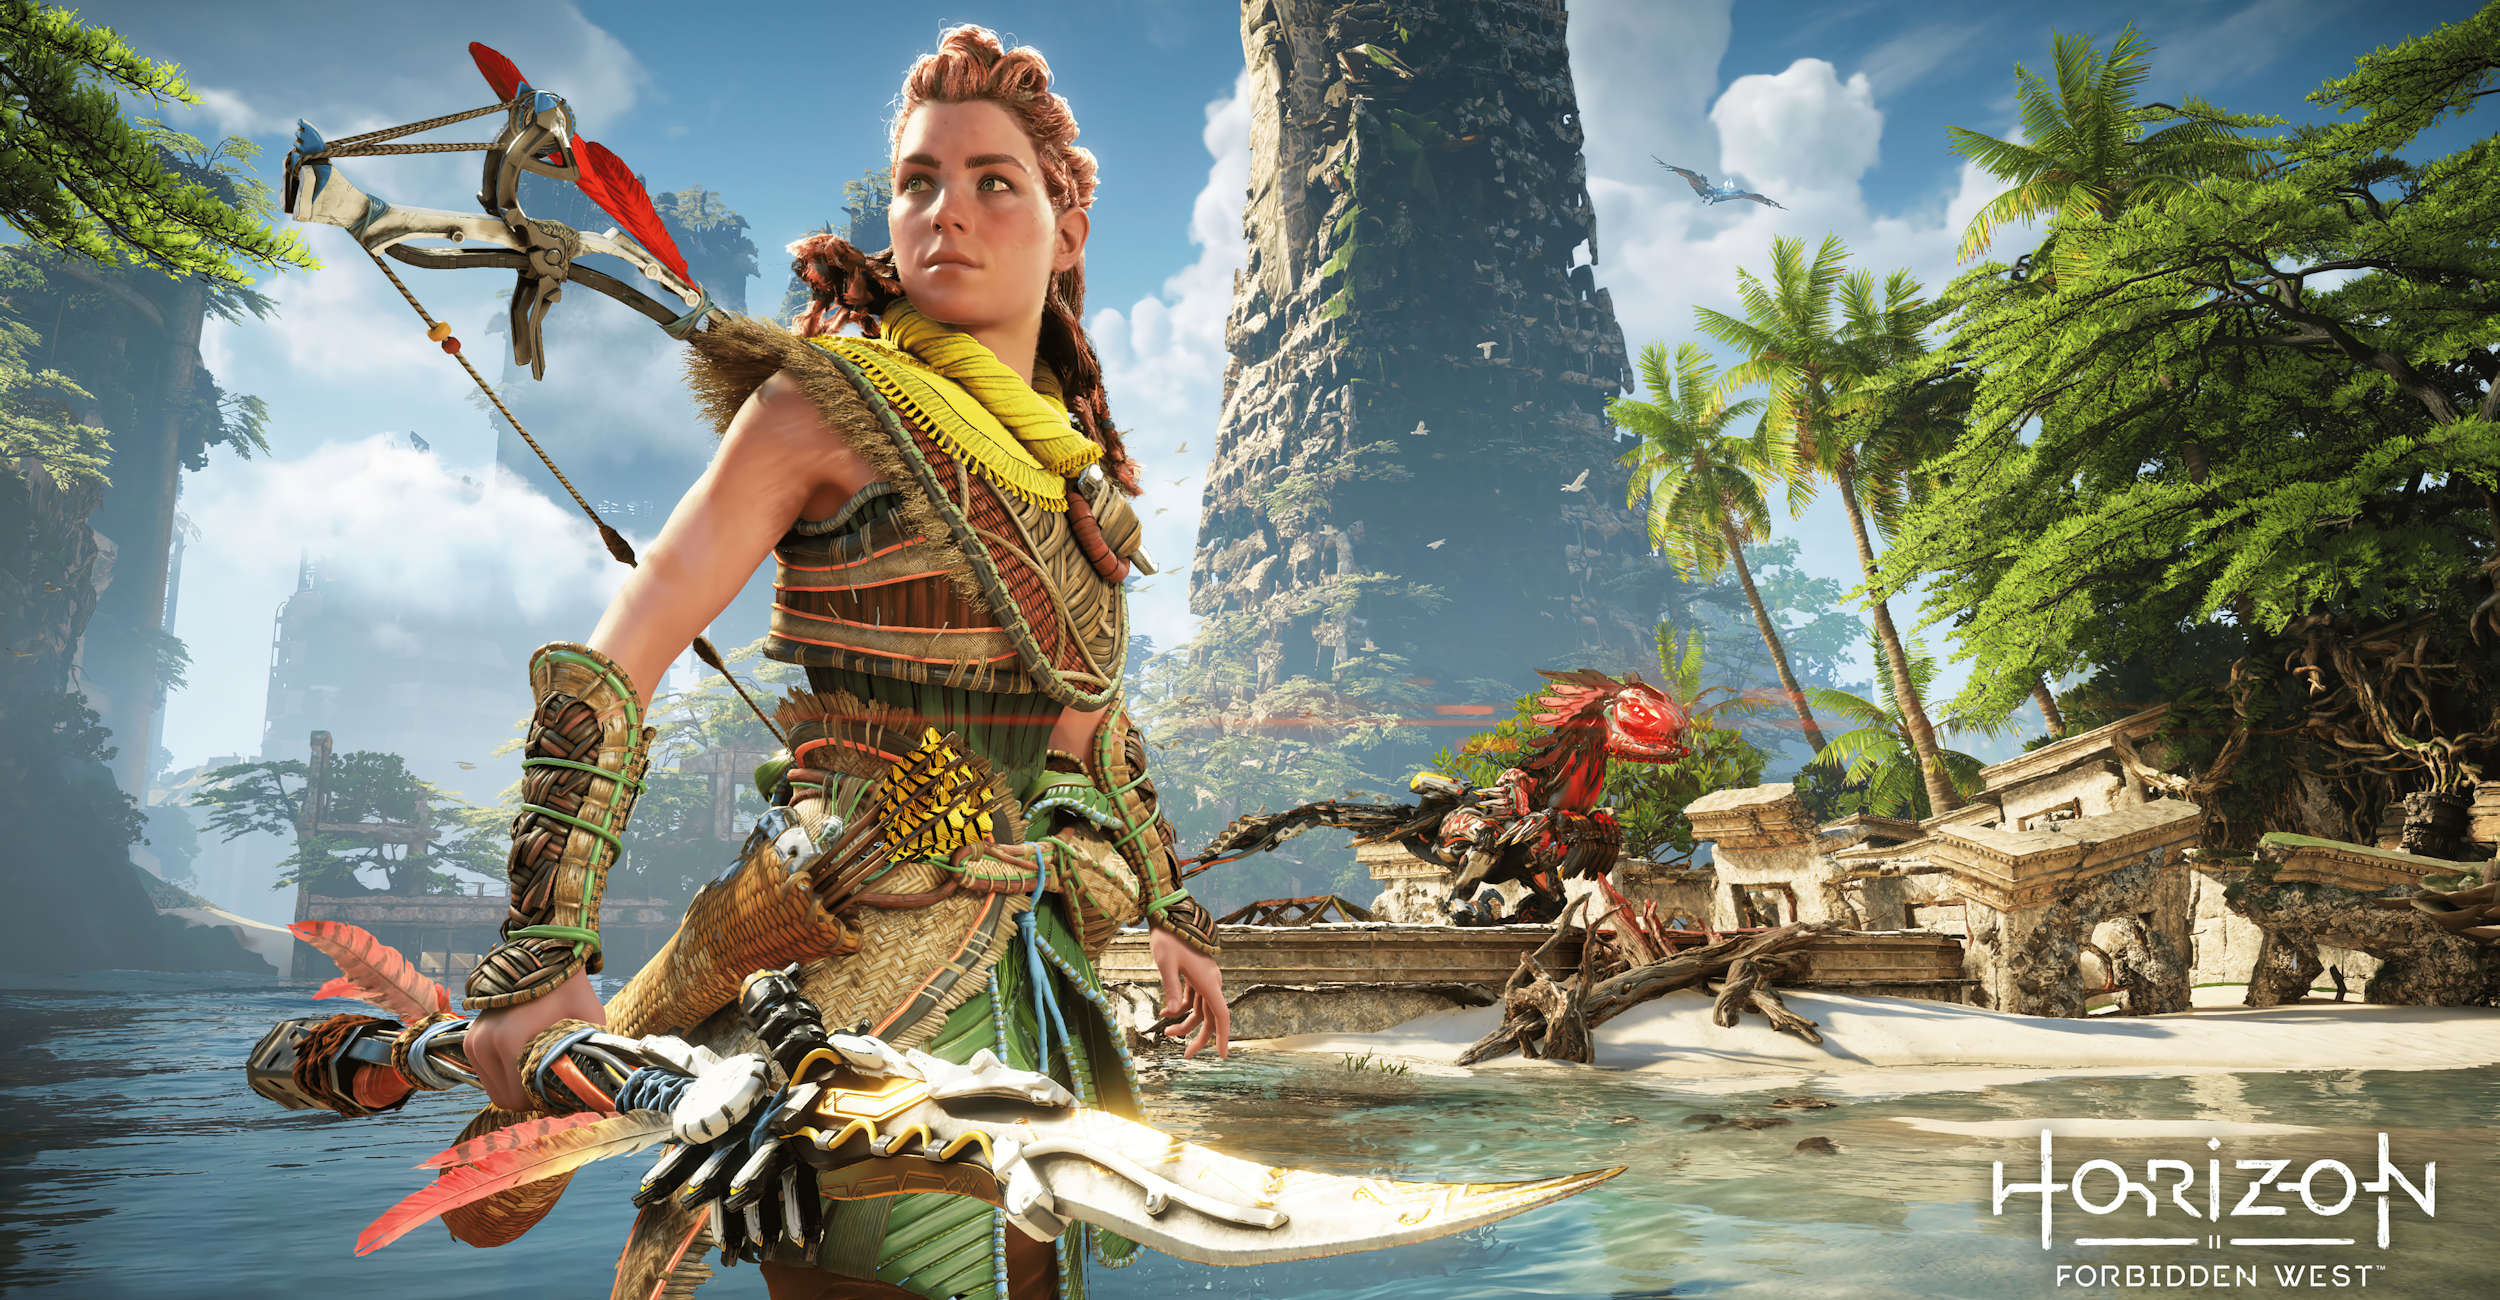 Horizon Forbidden West Complete Edition PC specs revealed: GeForce RTX 3060 recommended for optimal gameplay